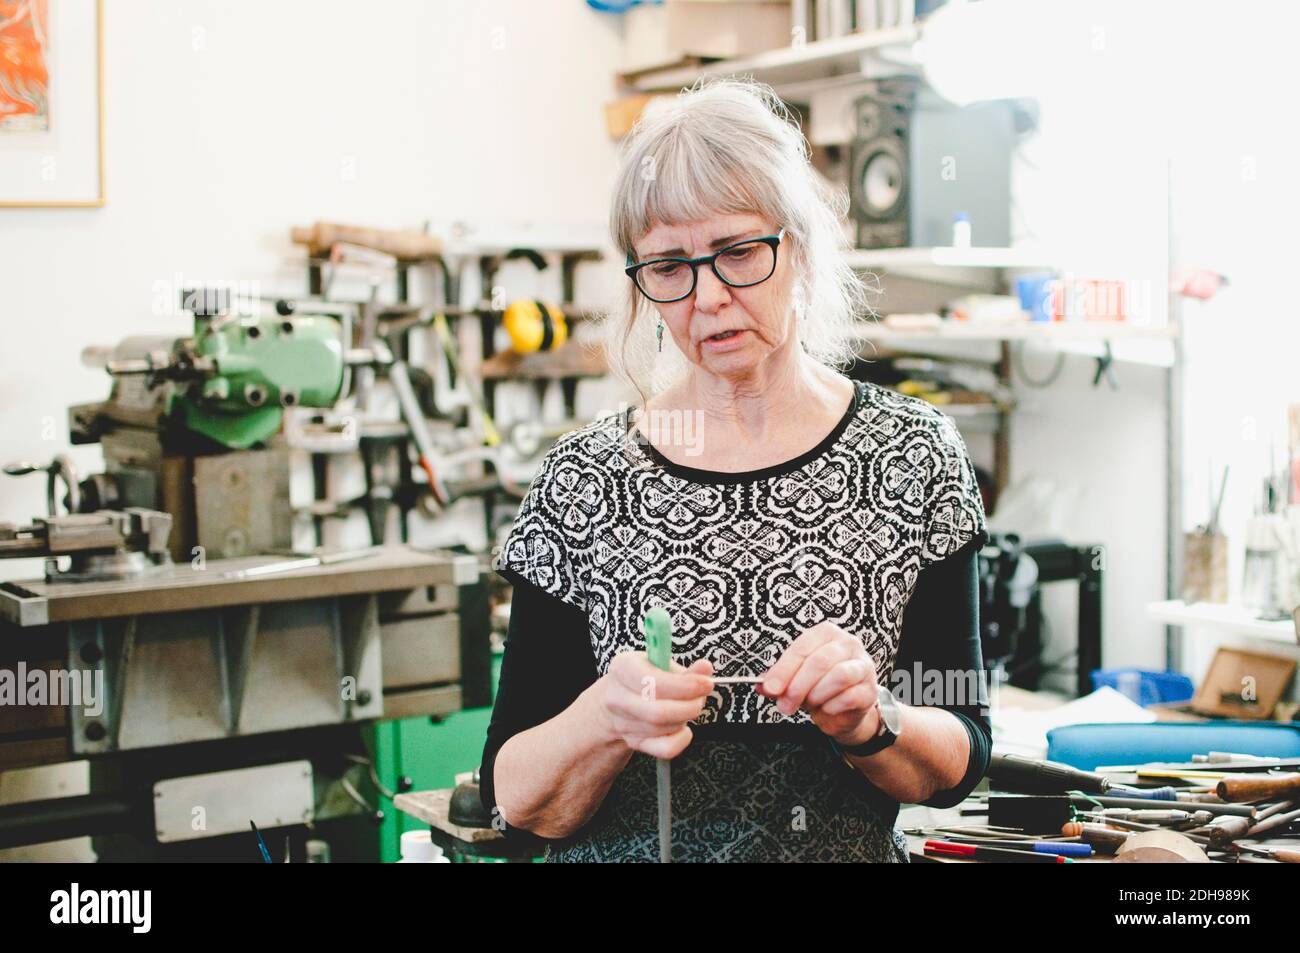 Senior woman holding work tool in jewelry workshop Stock Photo